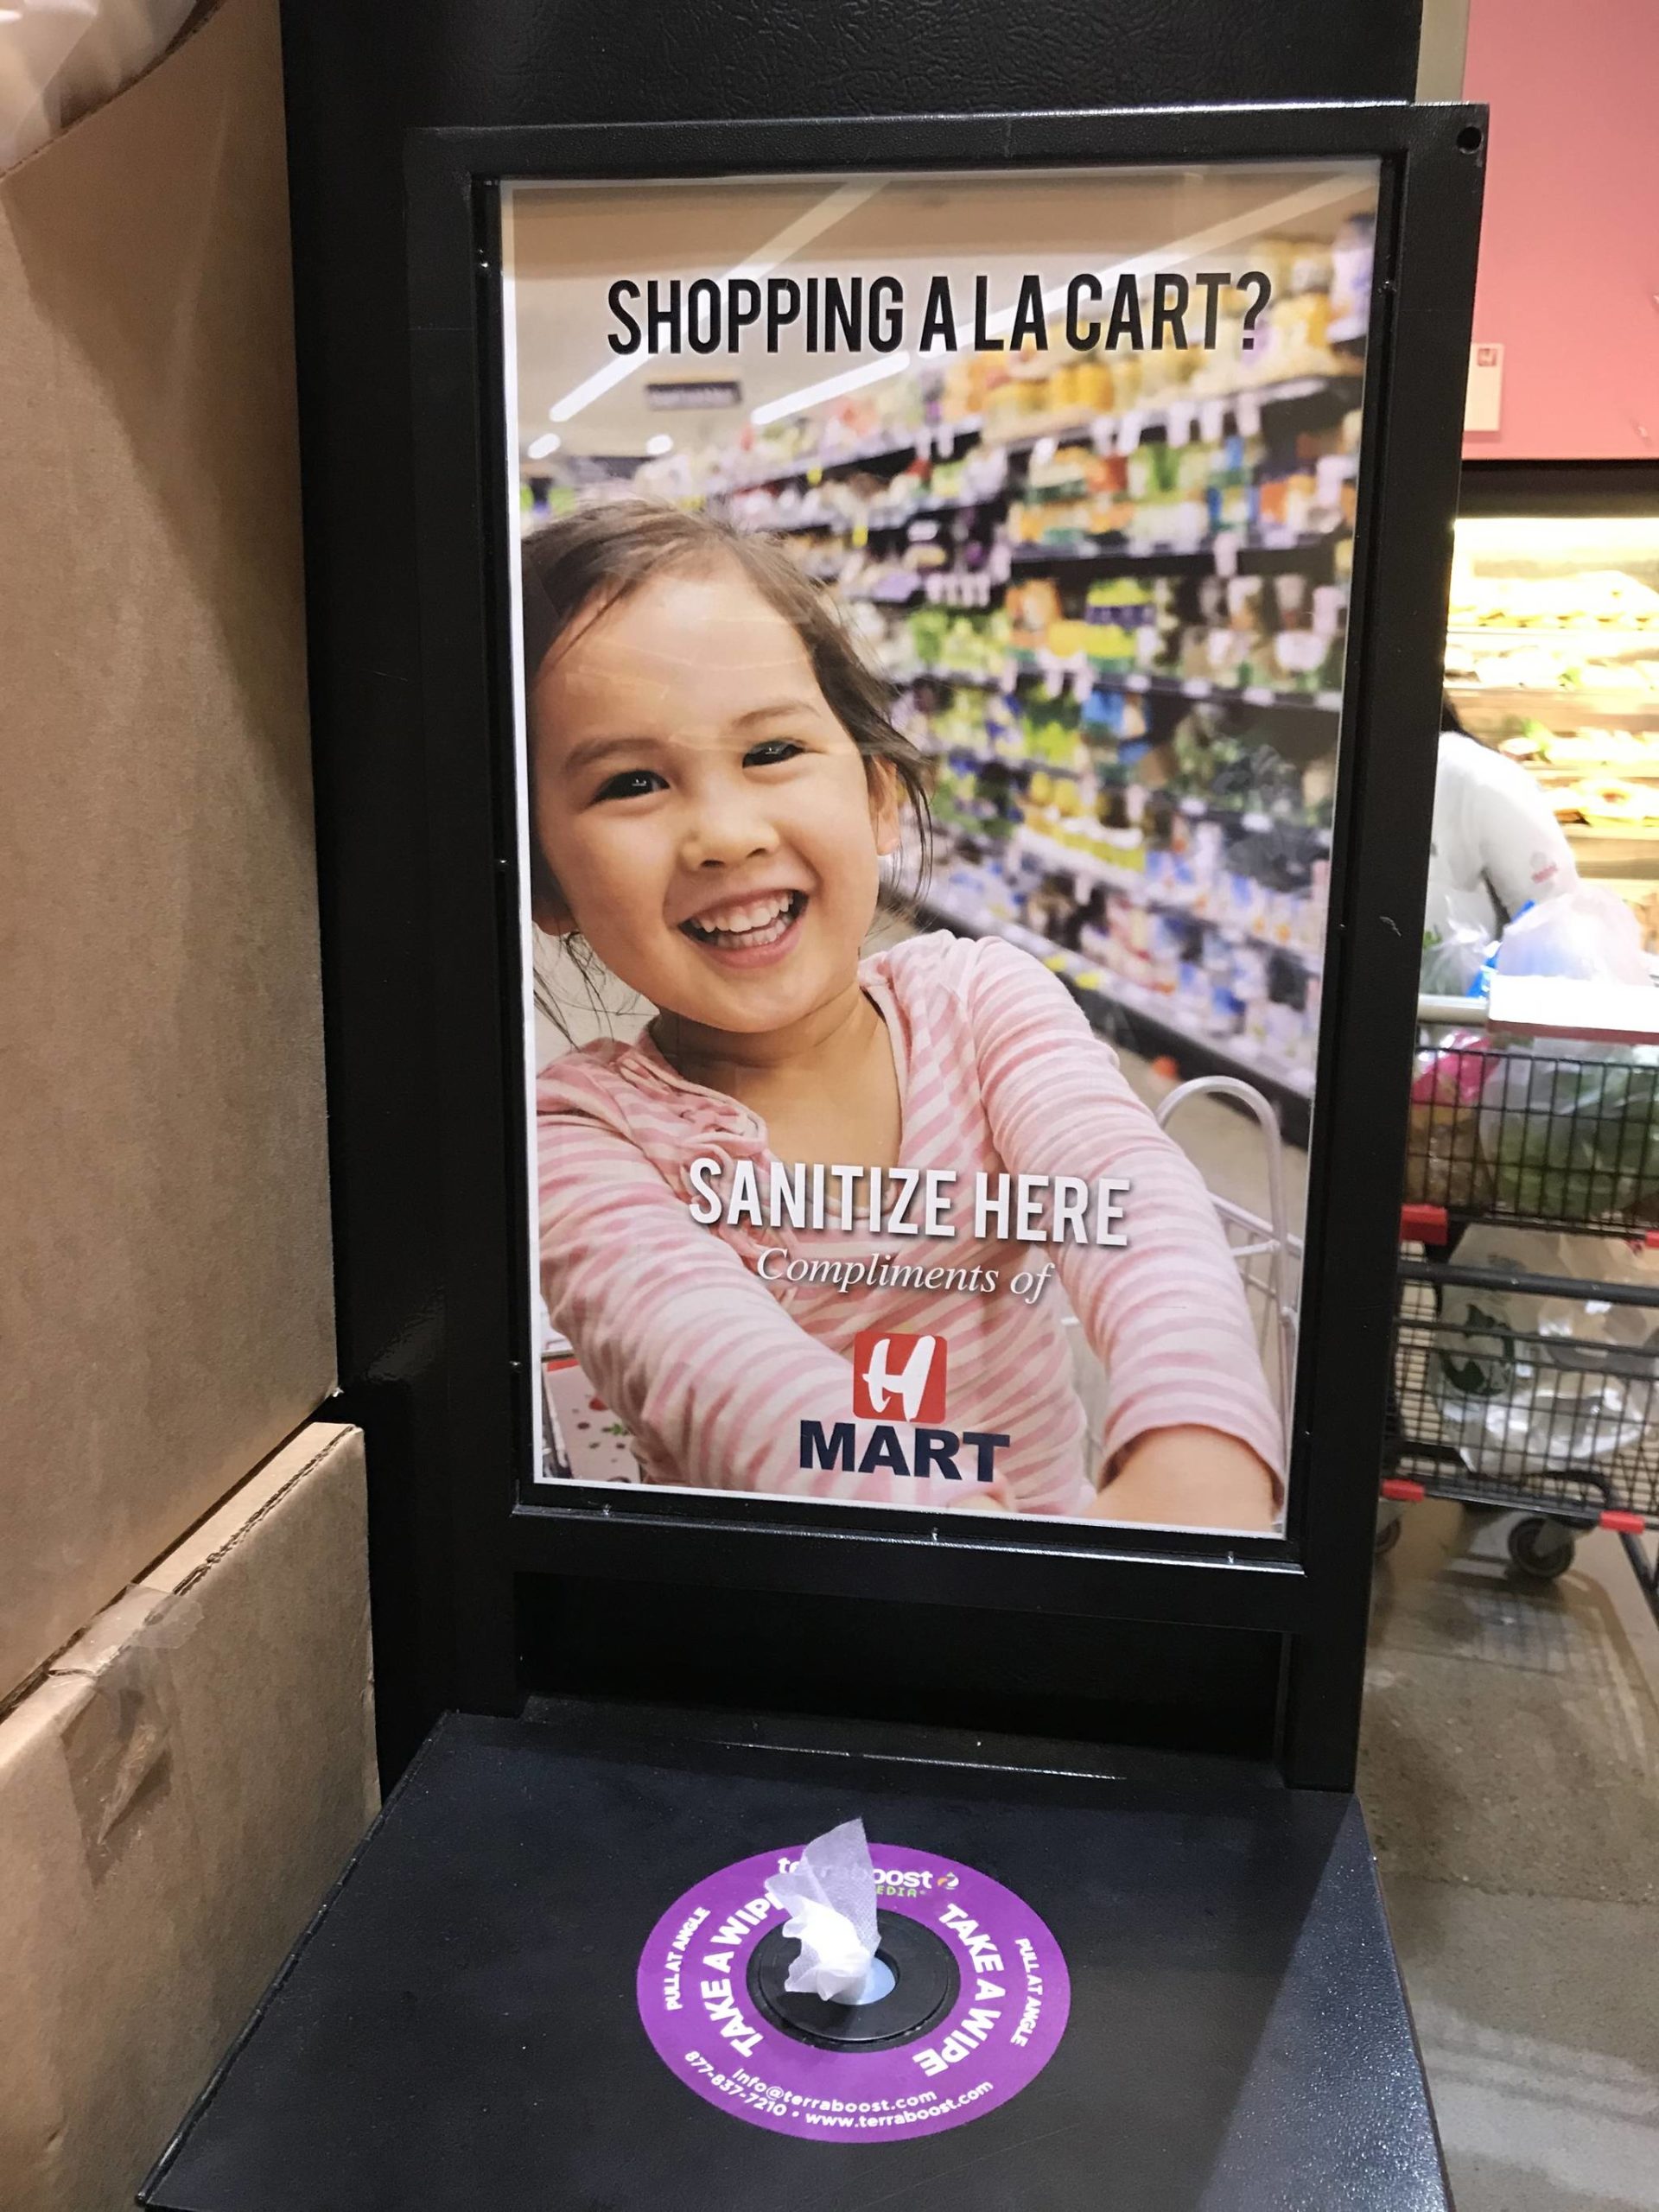 H Mart in Bellevue has added sanitizing wipes throughout its store for customers. Samantha Pak/staff photo